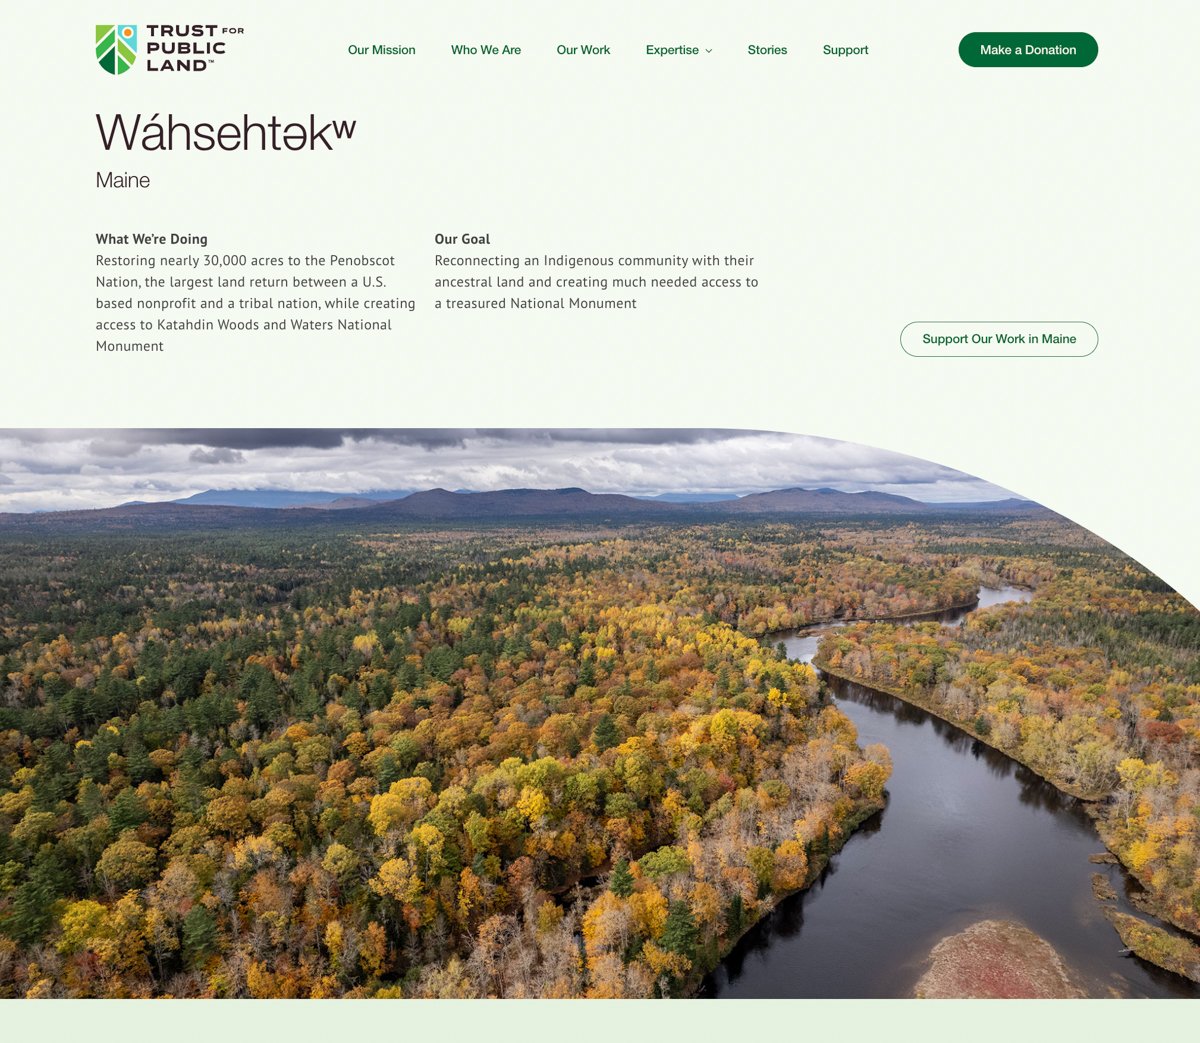 A screenshot from the Trust for Public Land website showing Chris Bennetts photo.